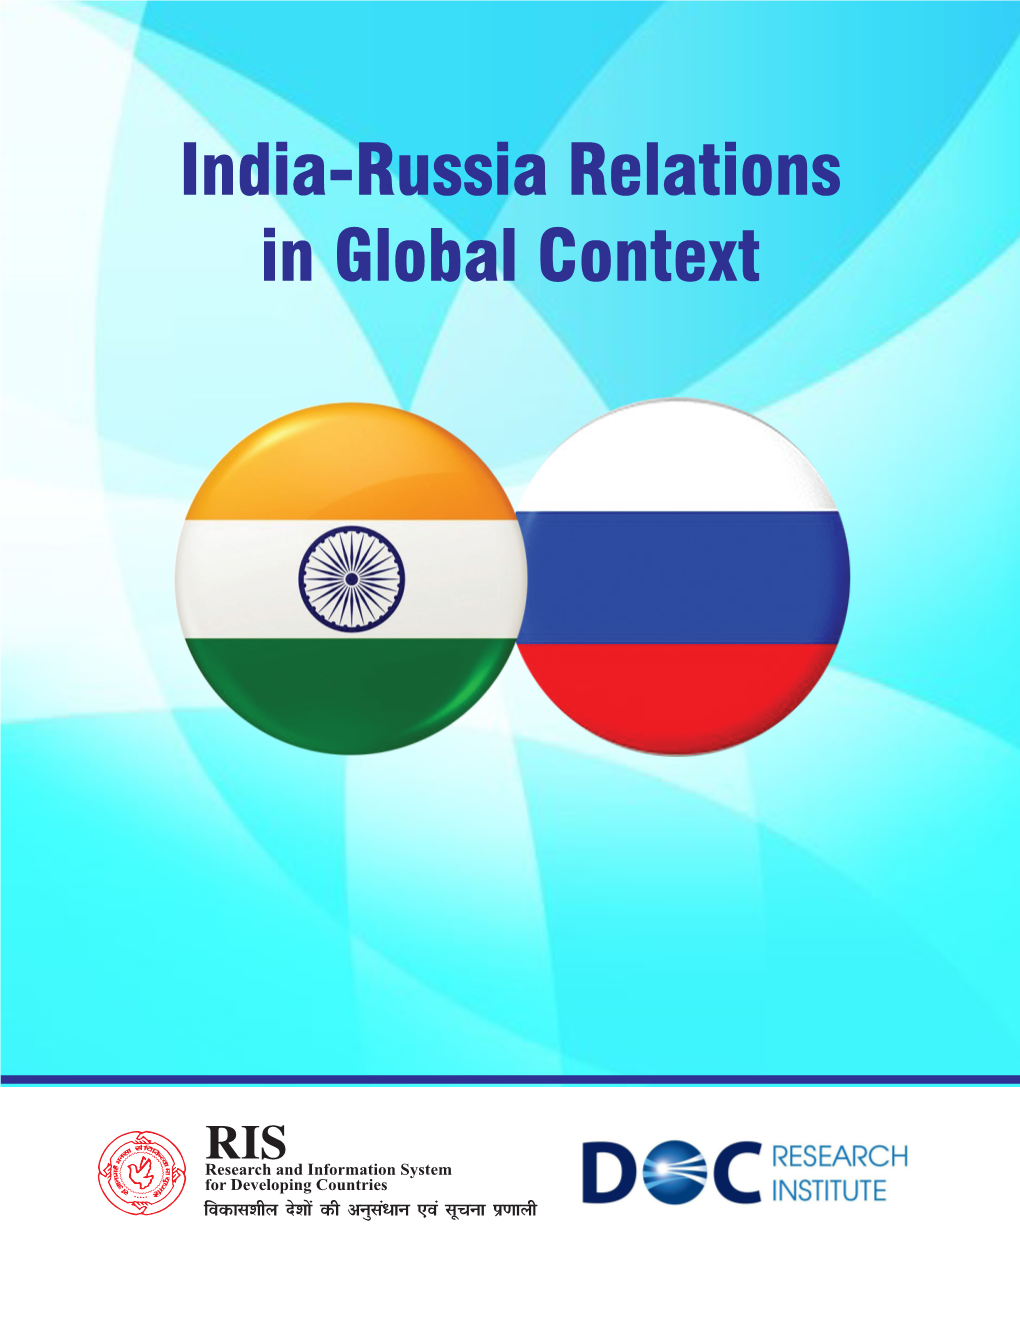 India-Russia Relations in Global Context ABOUT the SPEAKER